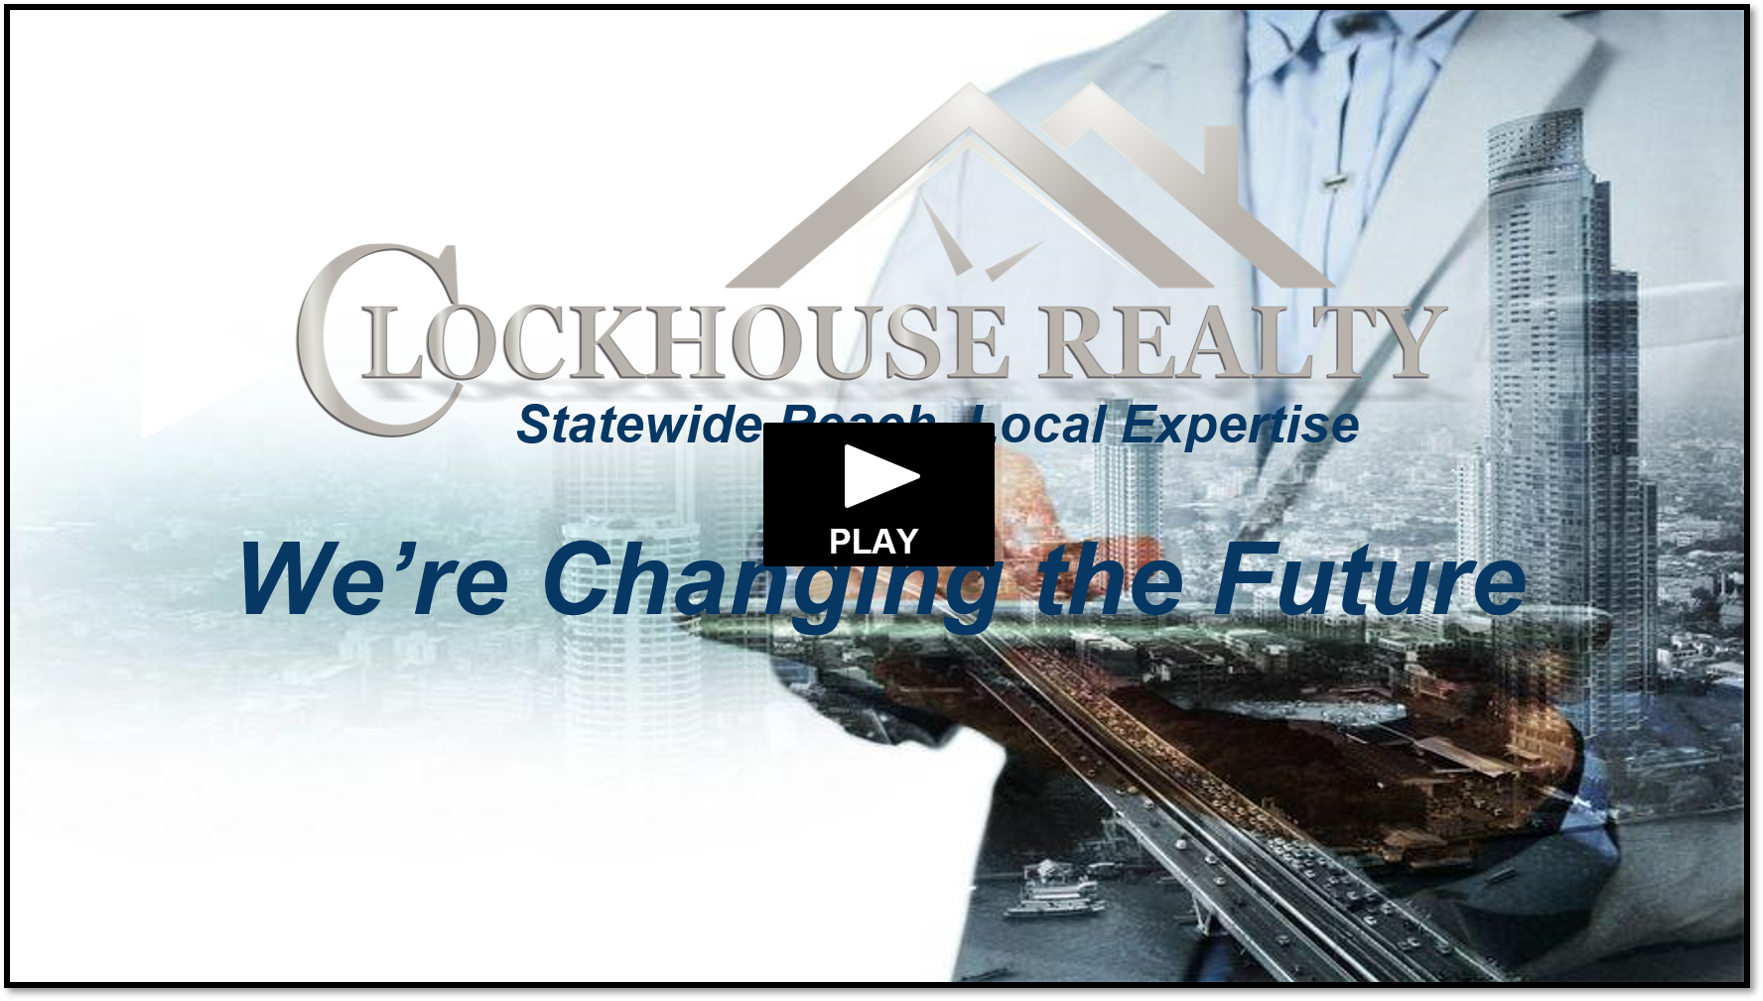 clockhouse realty powerpoint slideshow link